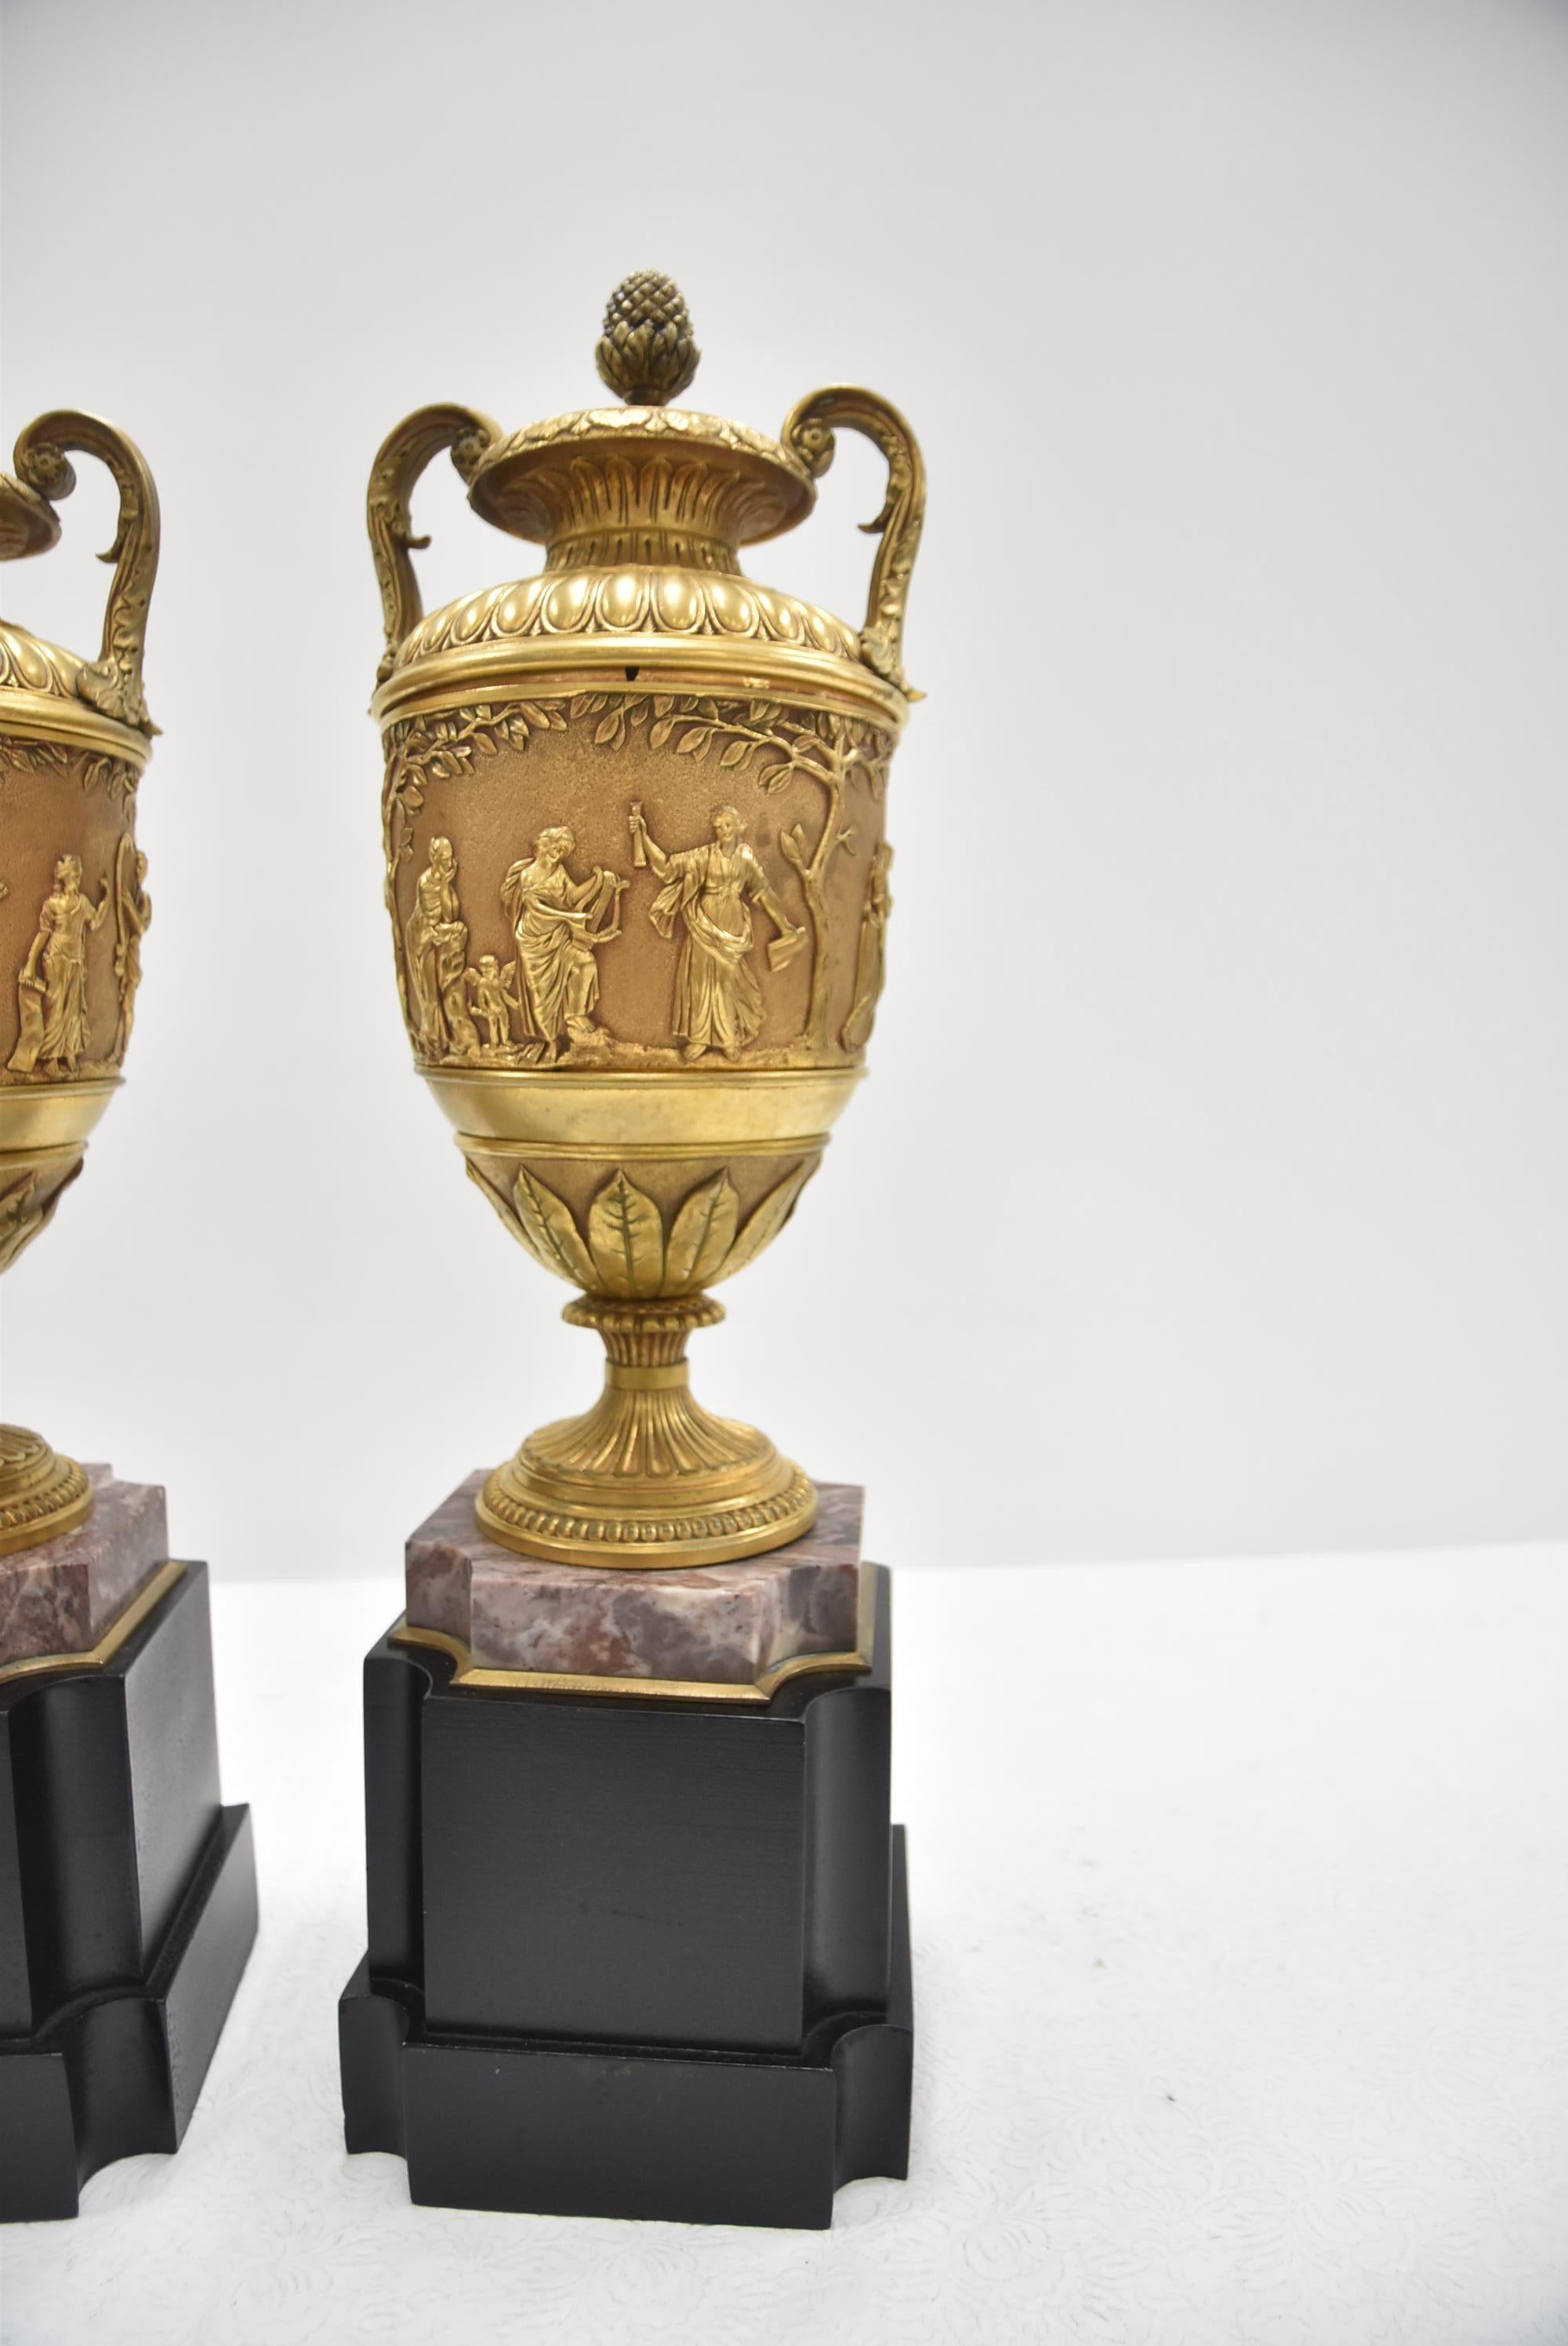 A fine pair of 19th century French gilt bronze urns with classical figures on marble bases. Attributed to Barbedienne.